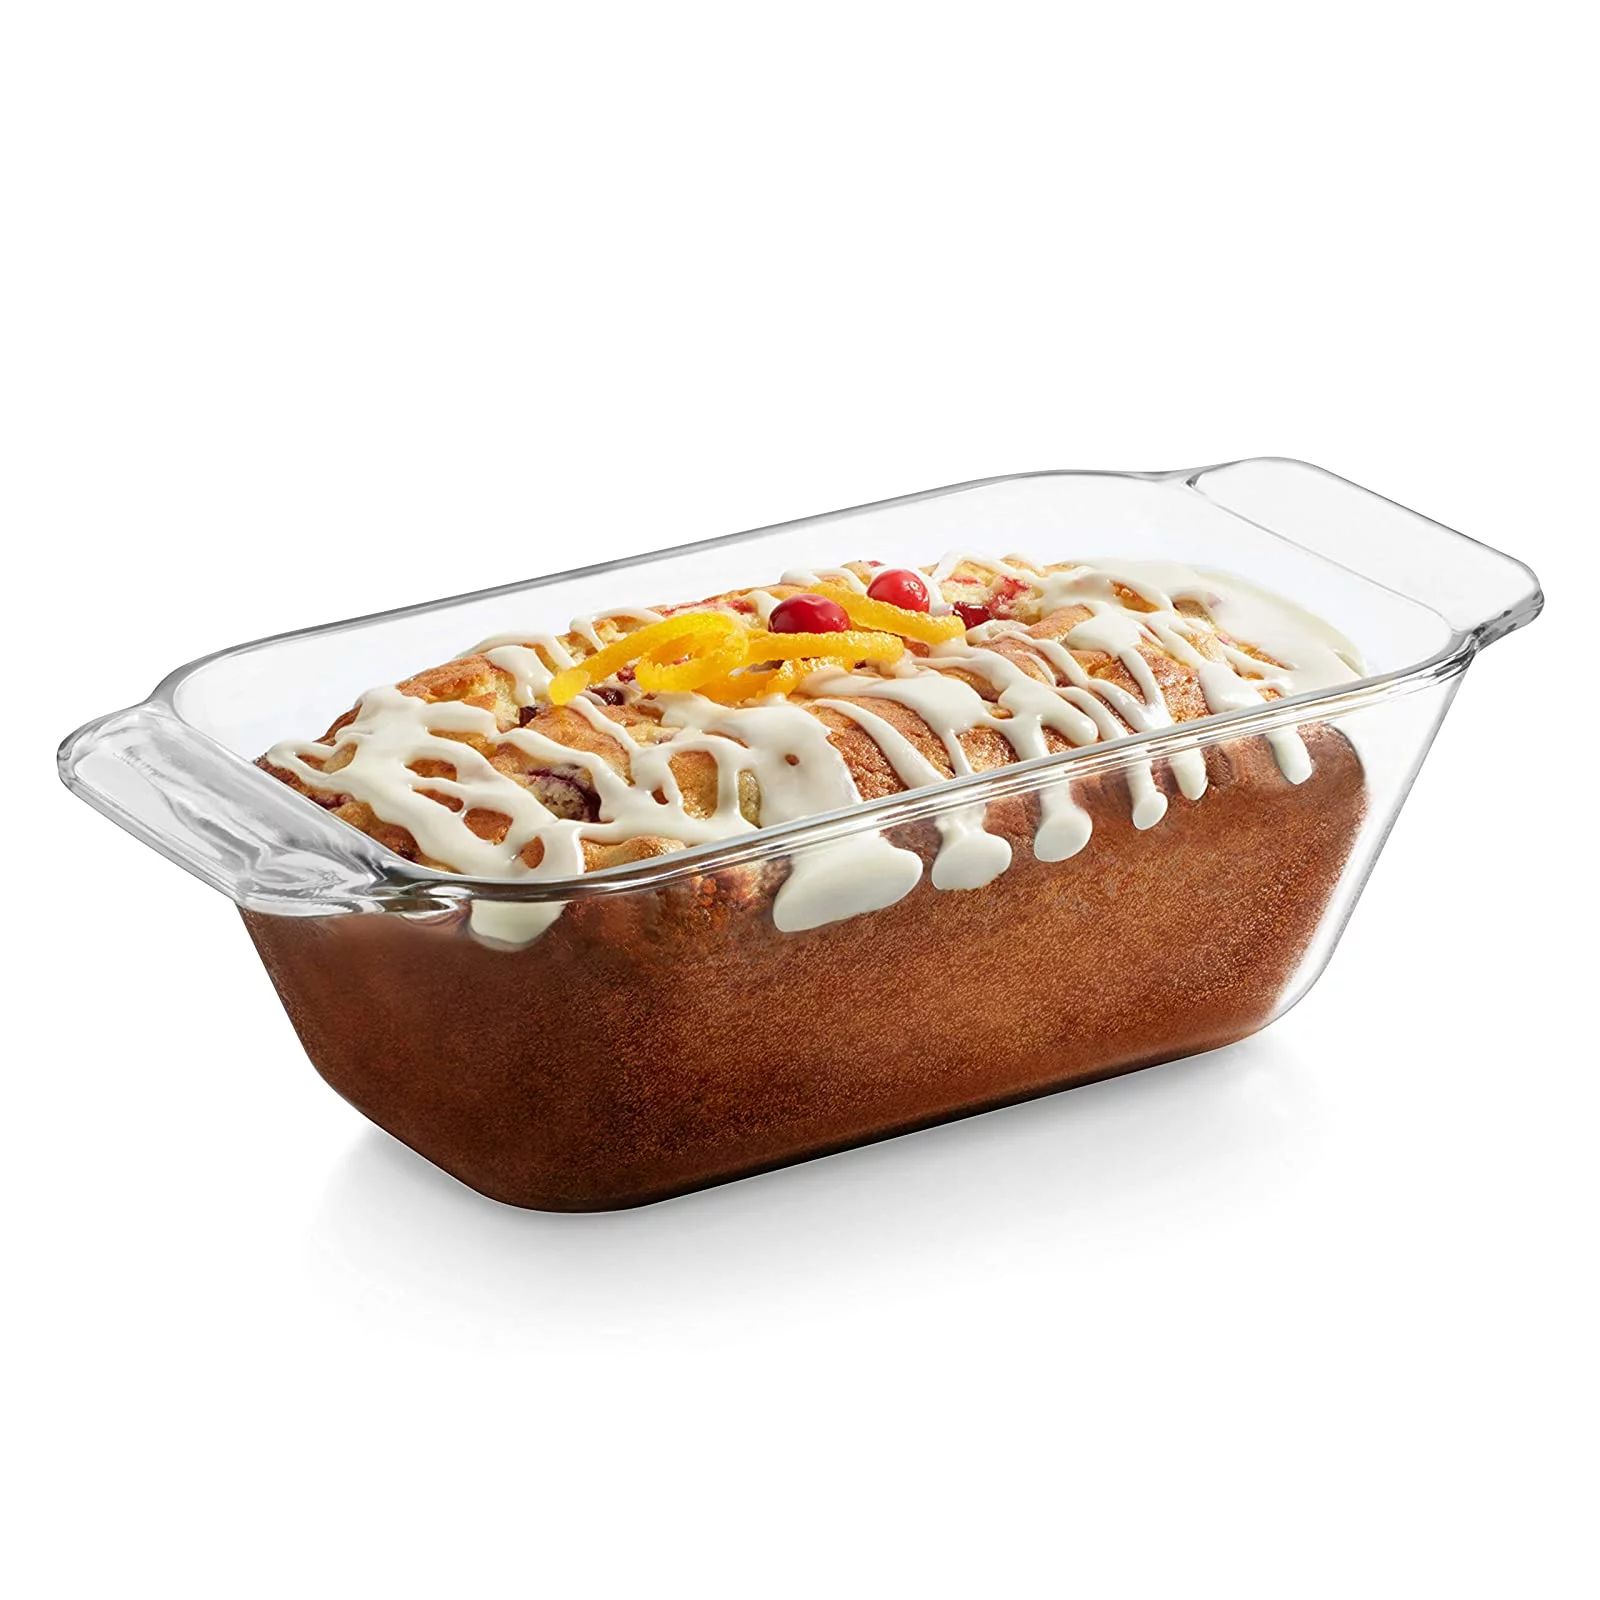 Libbey Bakers Premium Glass Loaf Dish, 9-inch by 5-inch | Walmart (US)